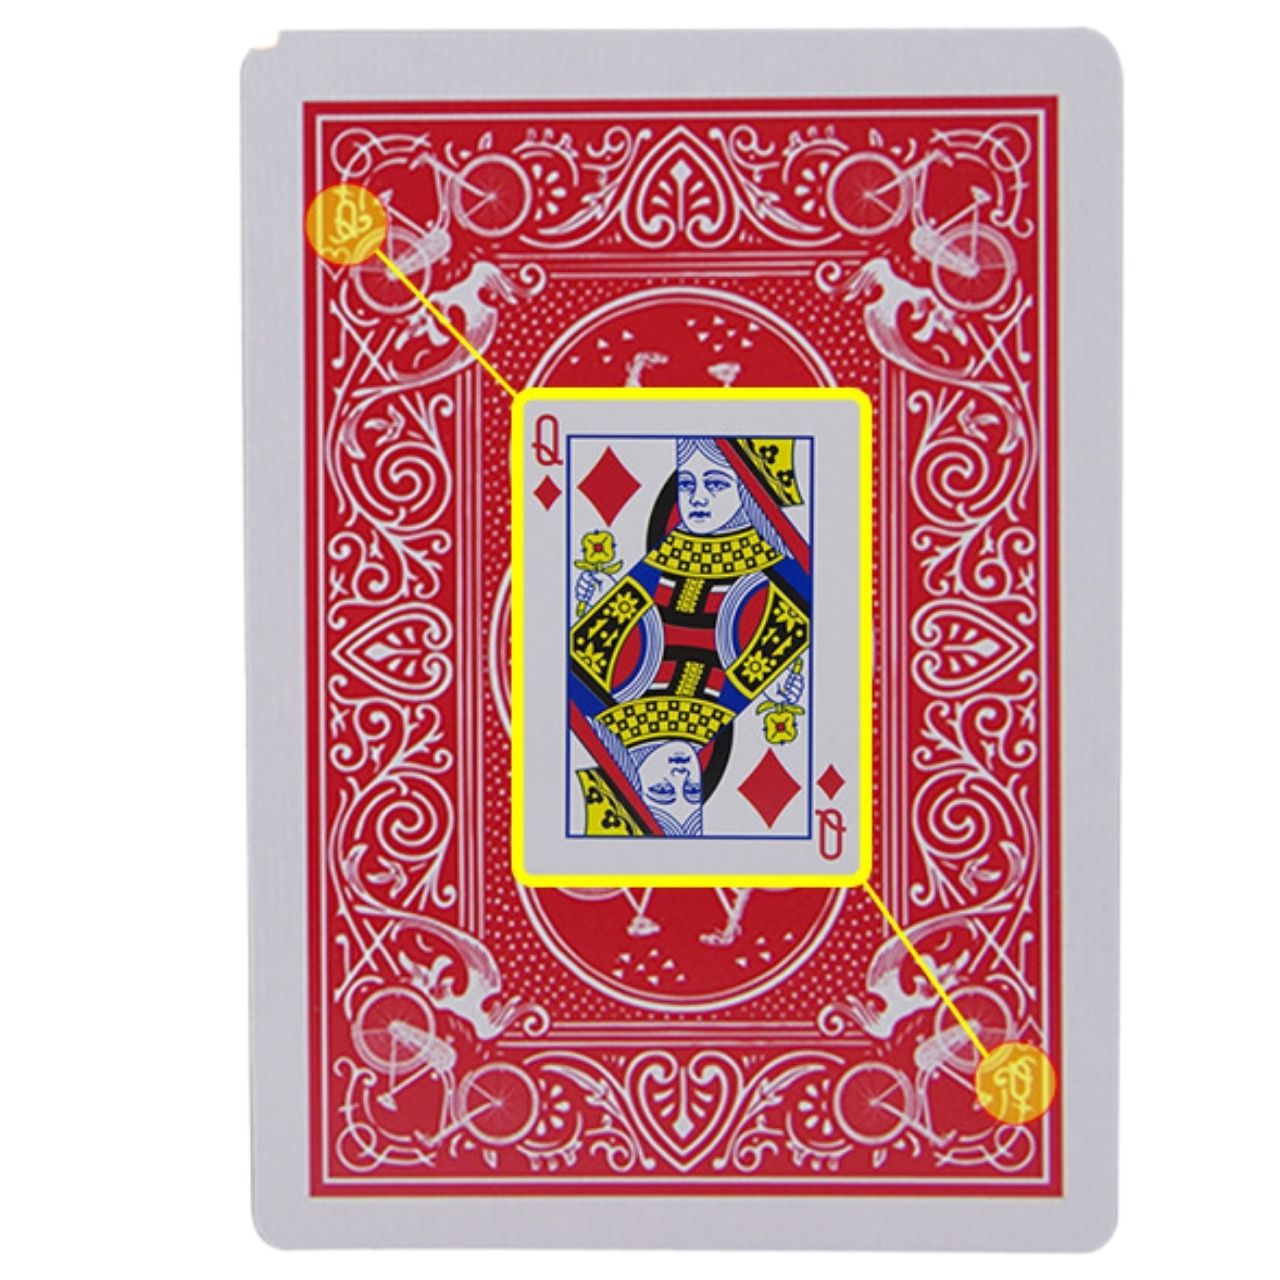  playing cards Magic for jugglery reverse side from understand squid sama